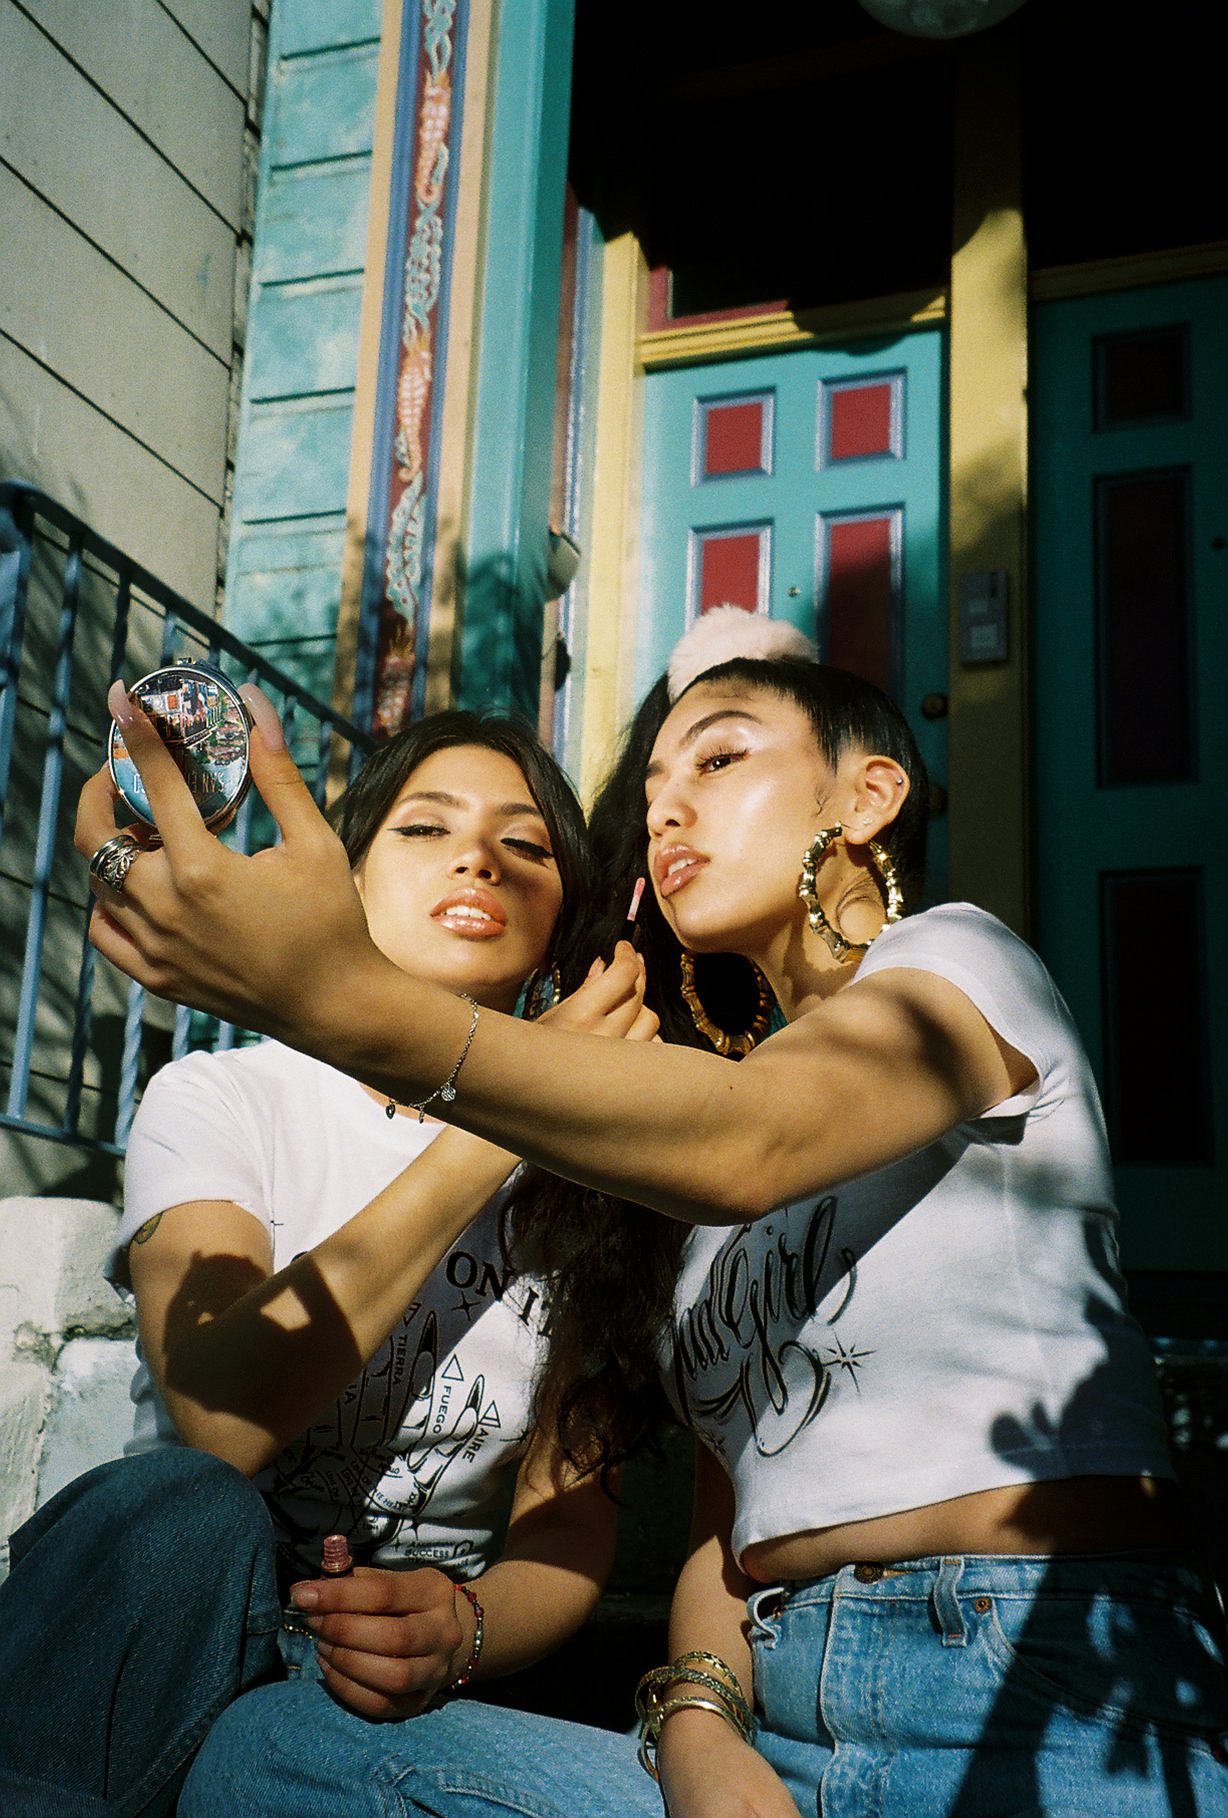 Thalia Gochez On How Her Photography Is A Form of Activism